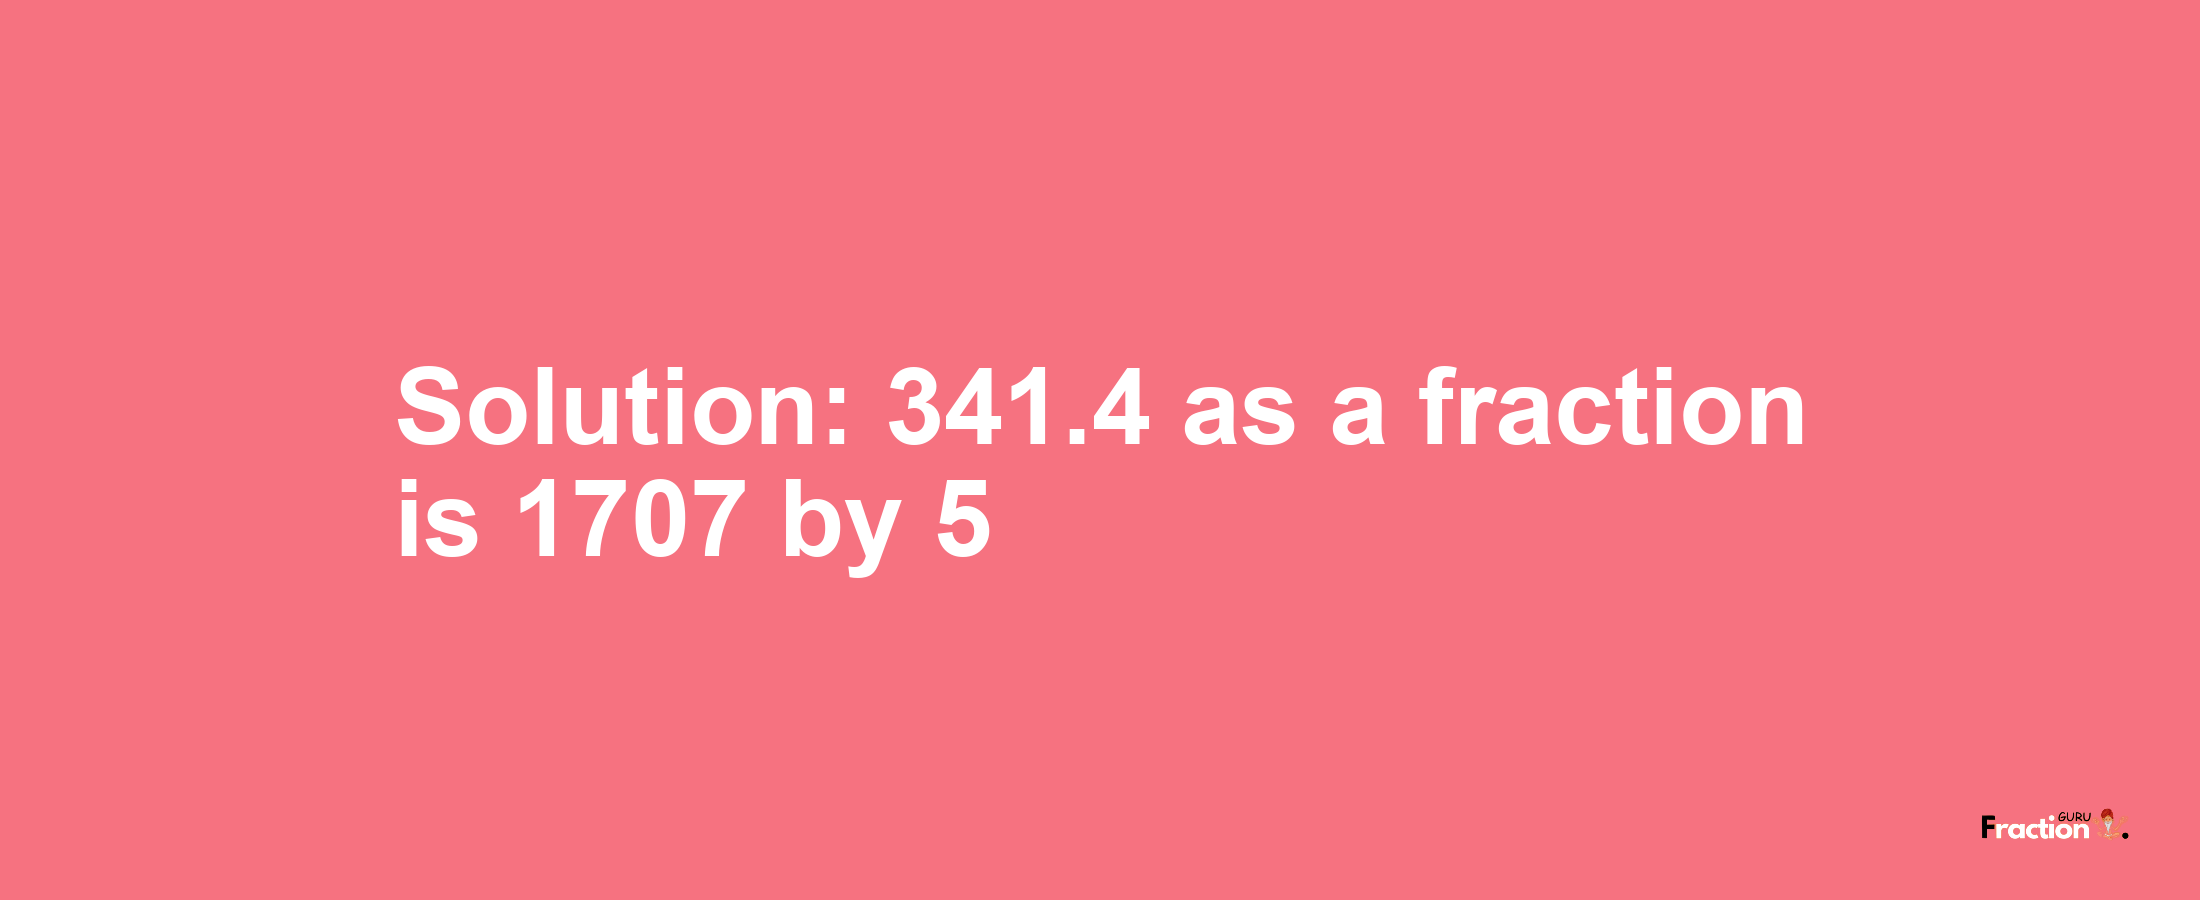 Solution:341.4 as a fraction is 1707/5